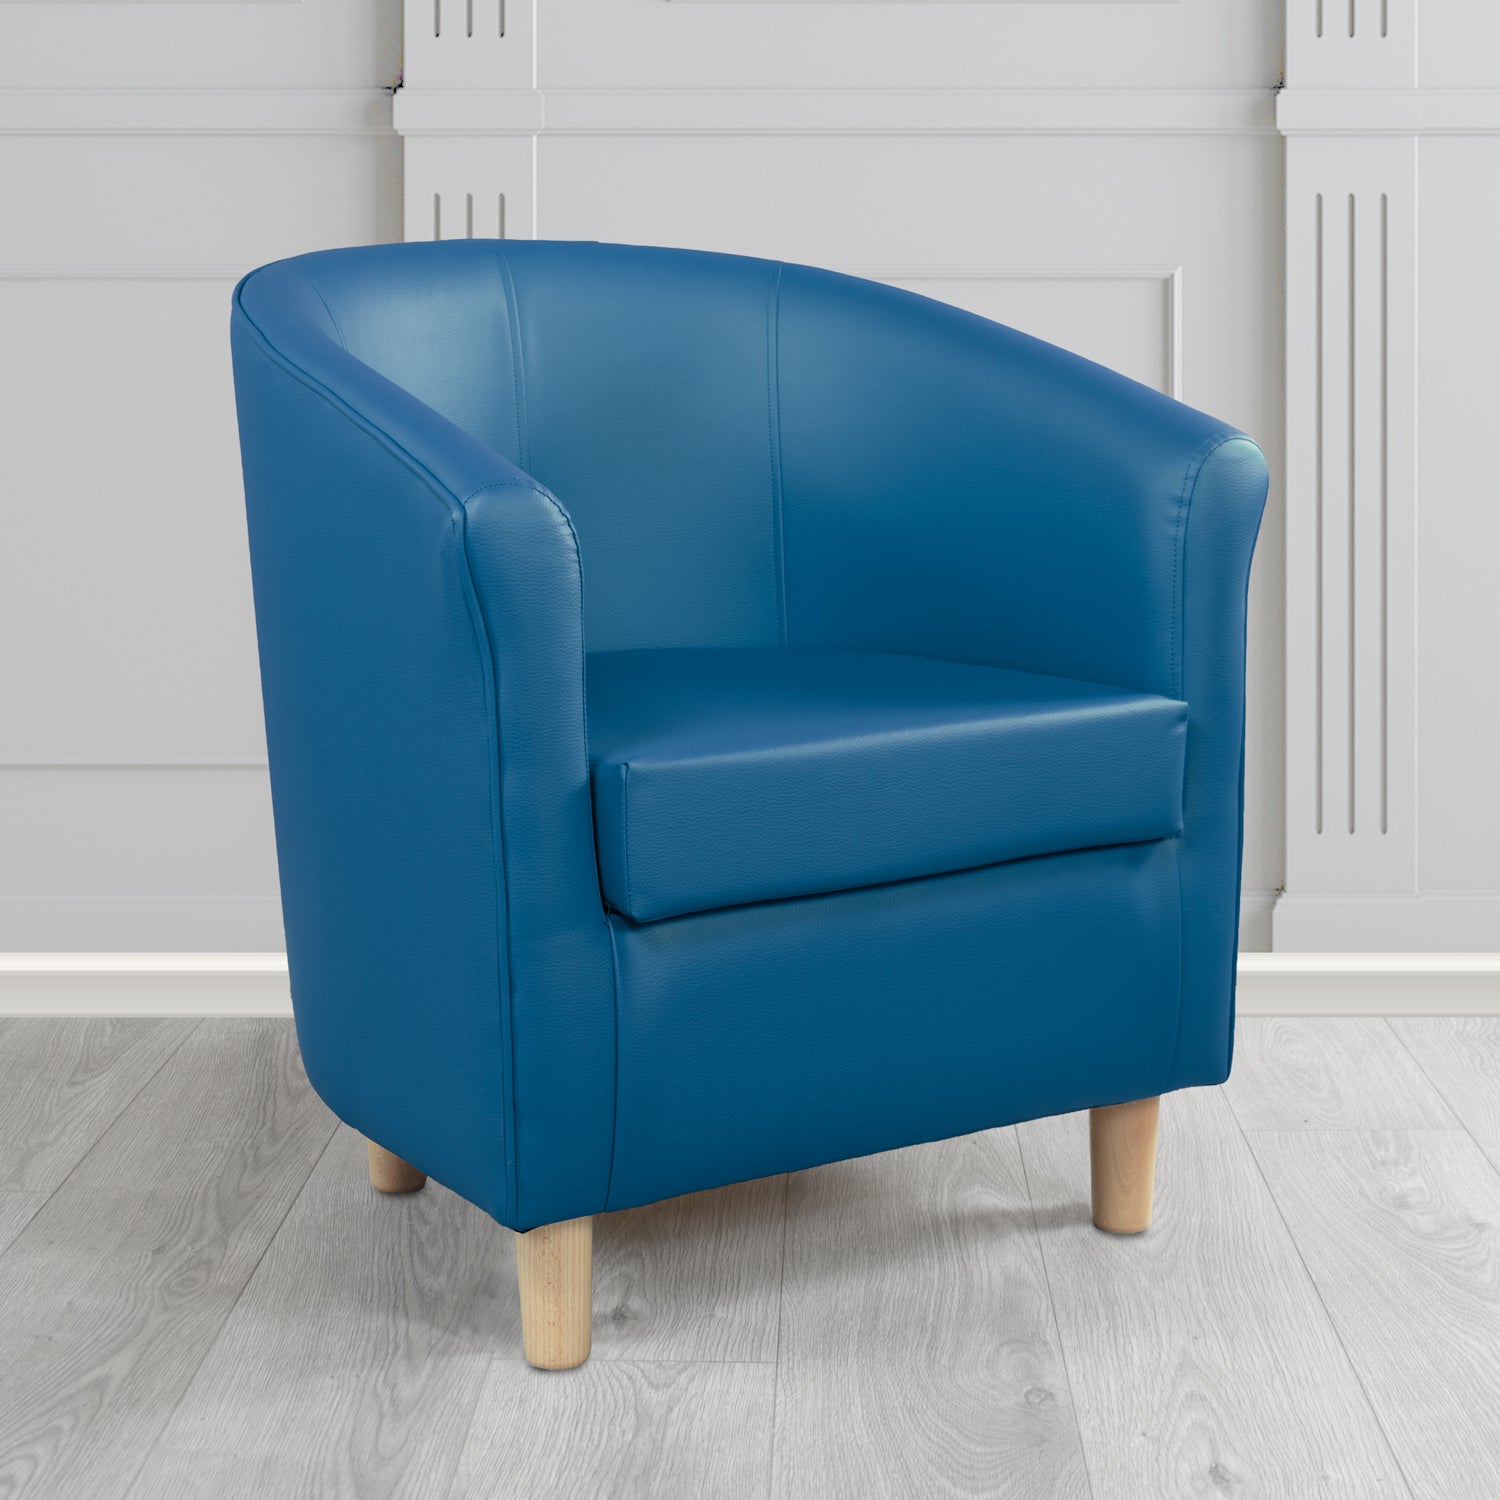 Tuscany Tub Chair in Madrid Royal Faux Leather - The Tub Chair Shop